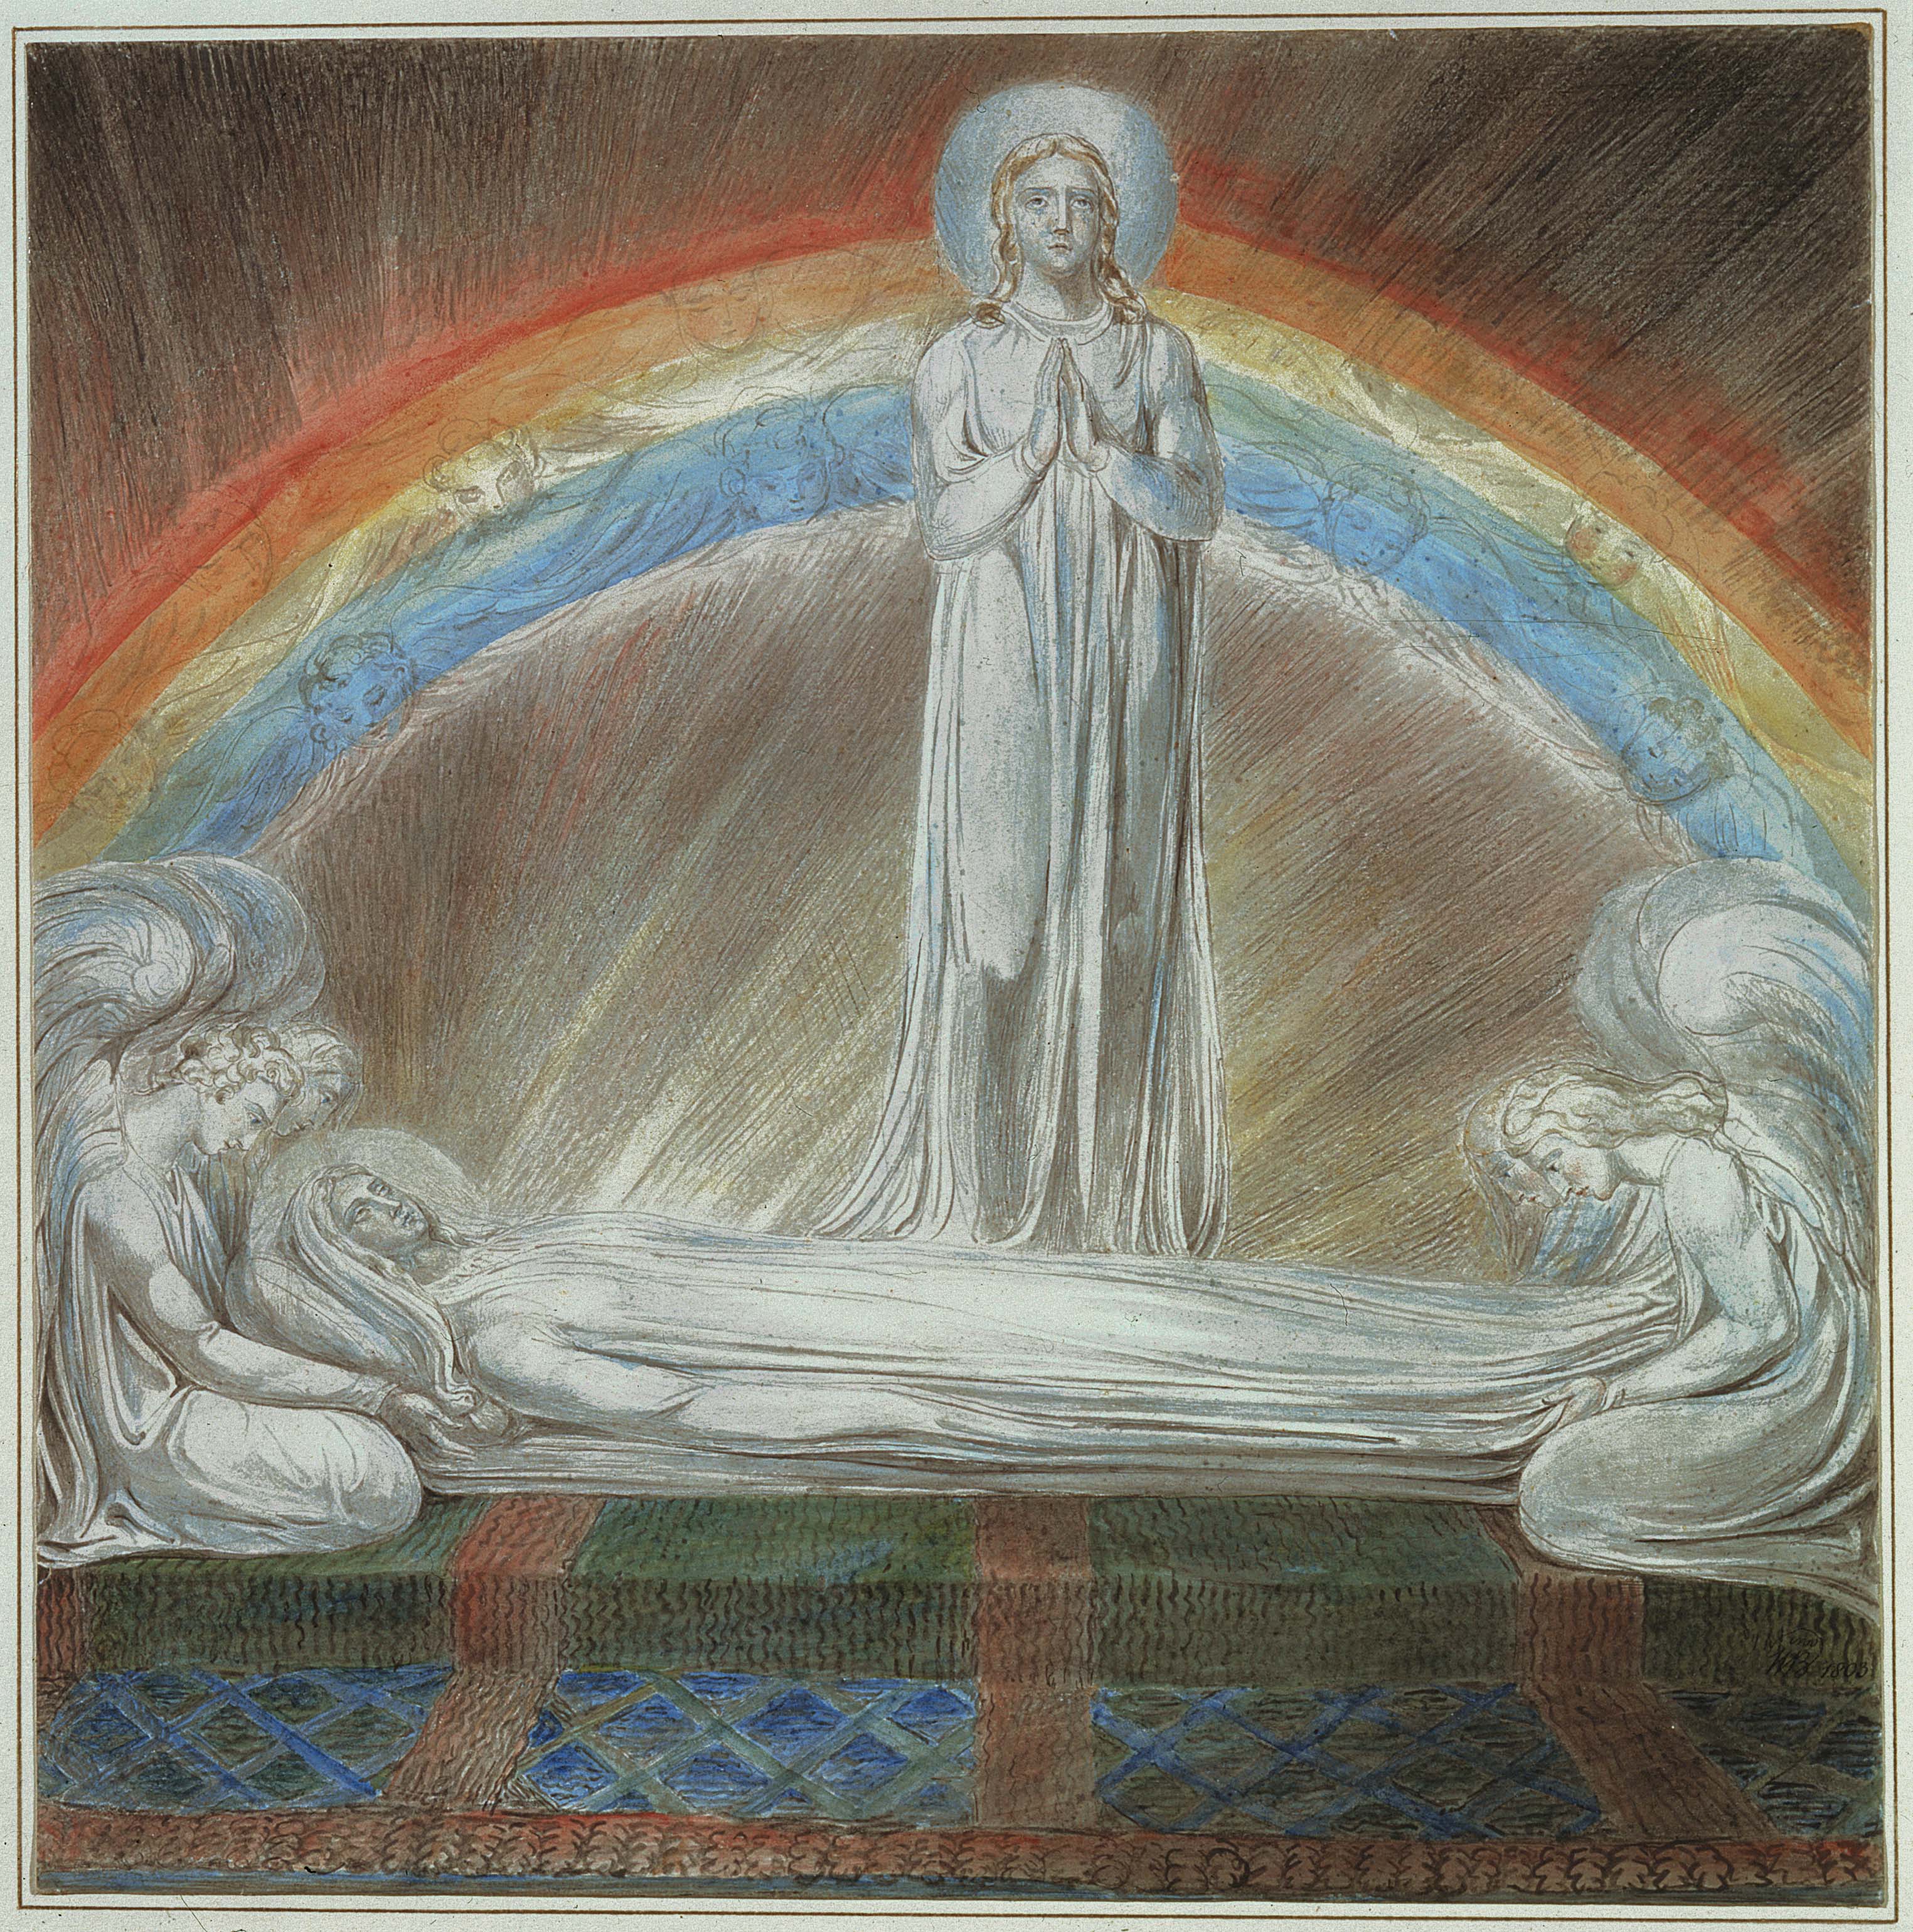 WILLIAM BLAKE CHRIST IN SEPULCHRE ANGELS CANVAS PICTURE PRINT WALL ART D110 